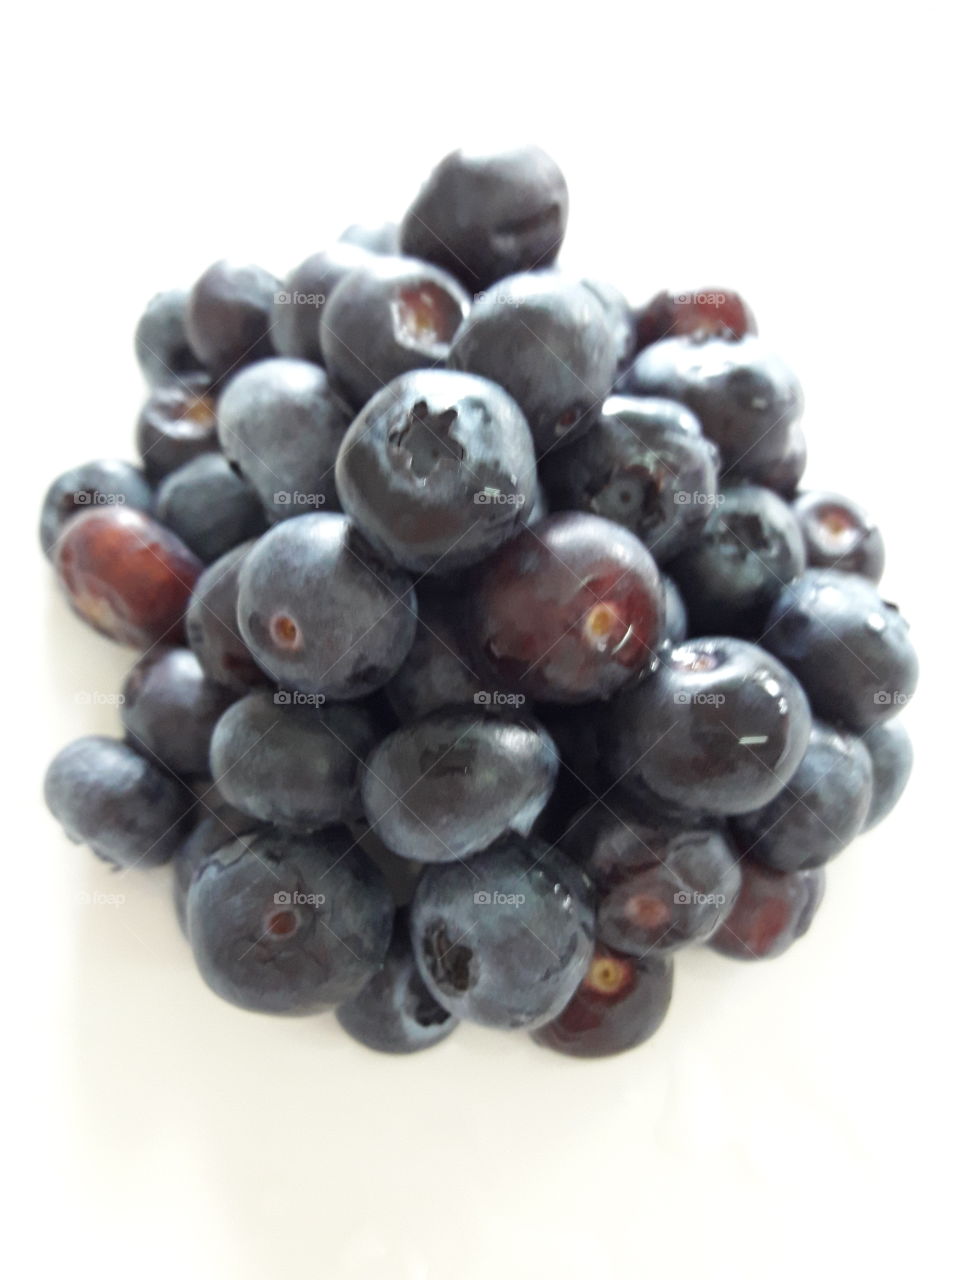 Blueberries have the highest antioxidant capacity of all commonly consumed fruits and vegetables.Flavonoids appear to be the major antioxidant compound.